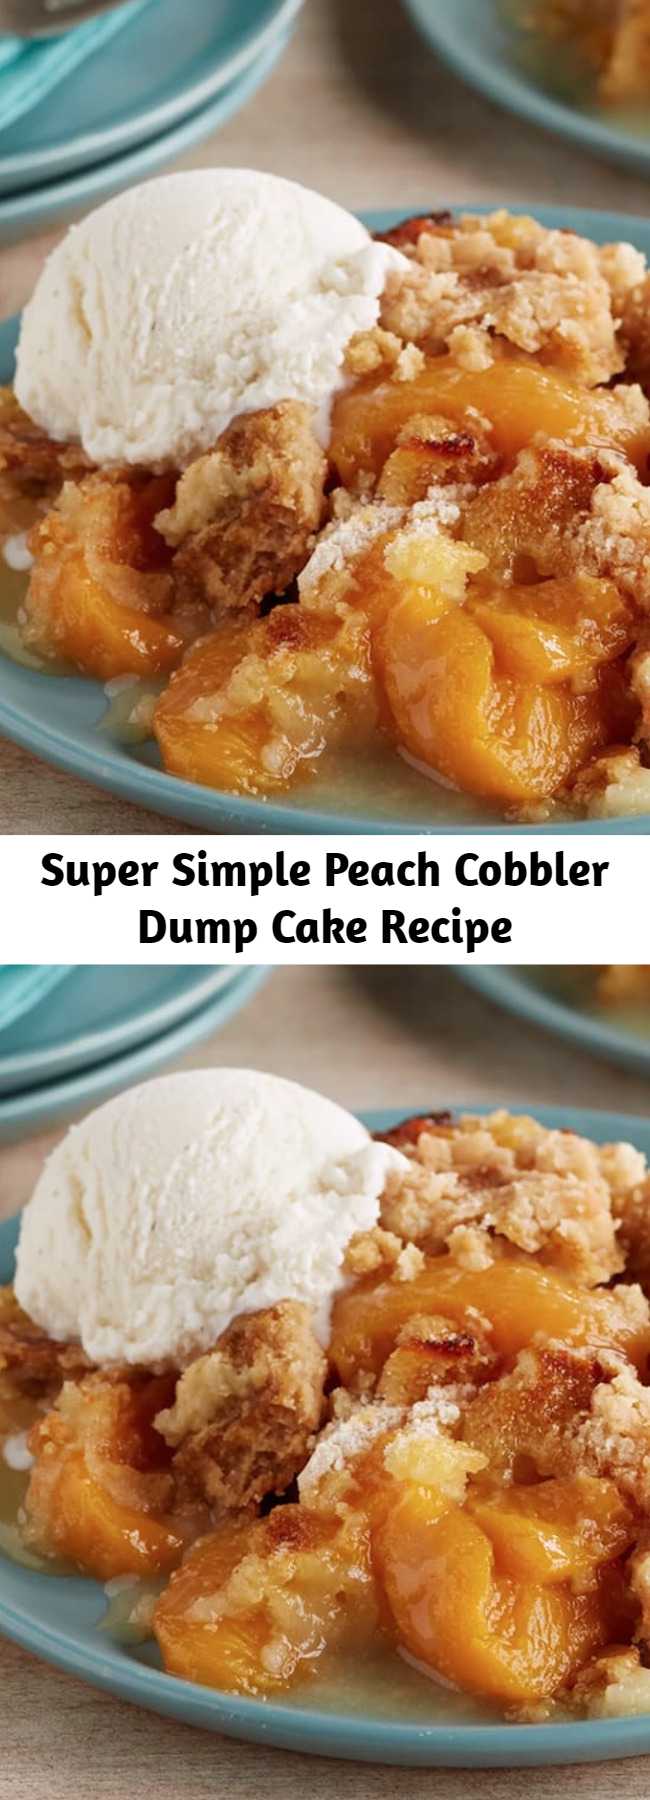 Super Simple Peach Cobbler Dump Cake Recipe - A super-simple sweet comfort food, made with 3 ingredients! No mixer, no eggs! Just layer fruit, dry cake mix and butter right in the baking dish, and a delicious dessert bakes up that’s somewhere between a cobbler and a fruit crisp. Keep it good and simple, or try a variation to twist up the fun.